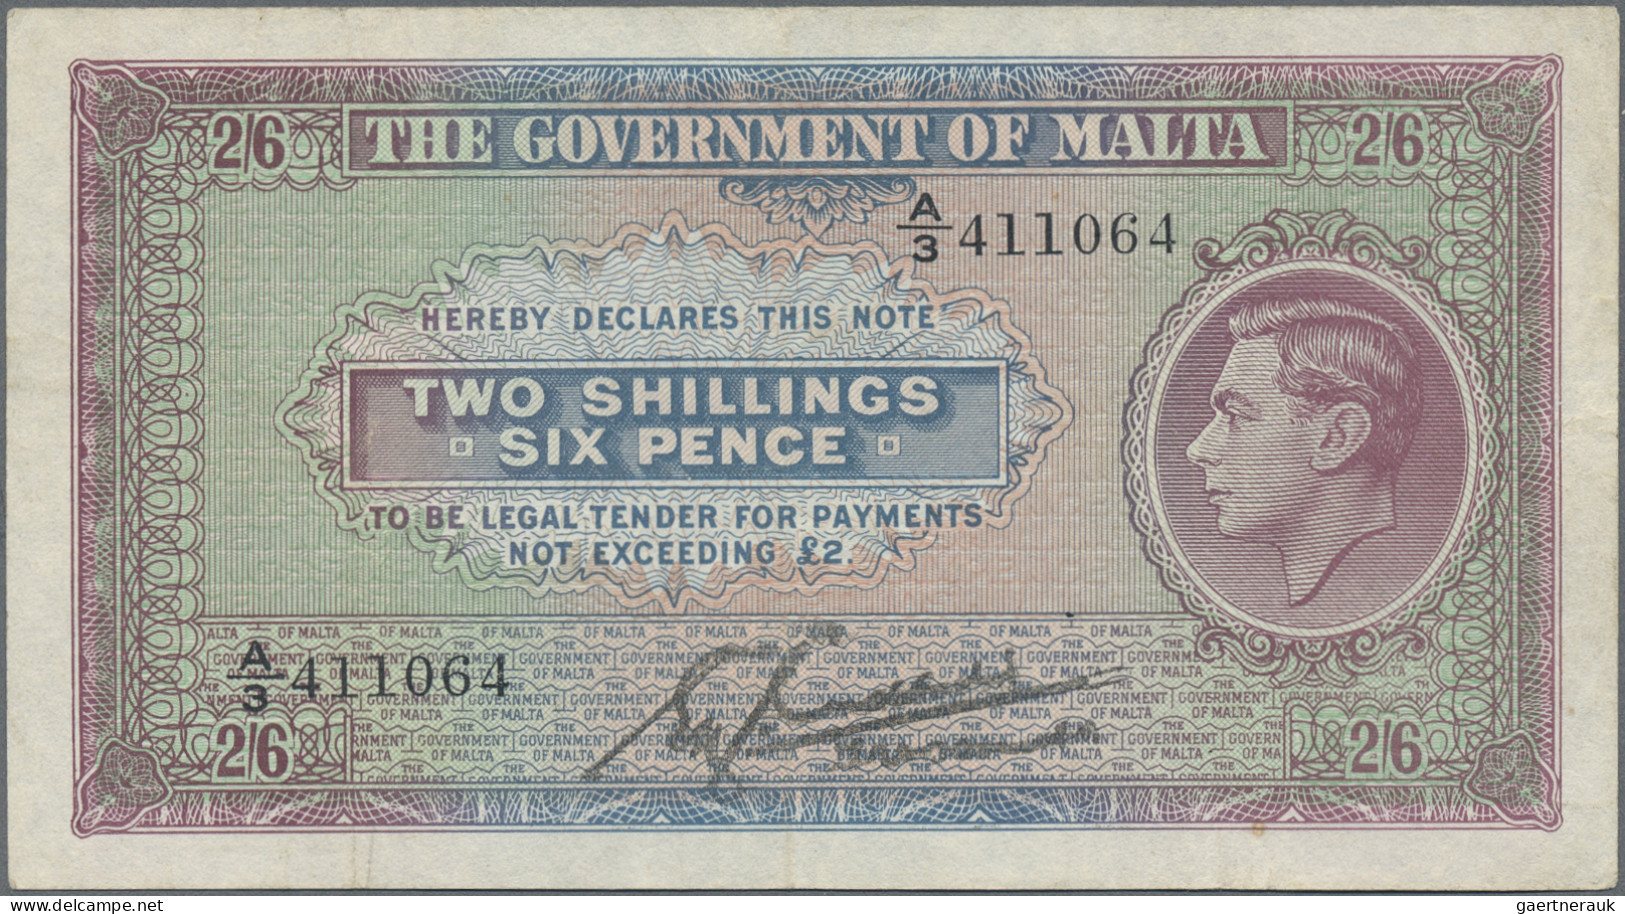 Malta: The Government of Malta, lot with 6 banknotes, 1940-1943 series, with 1 S